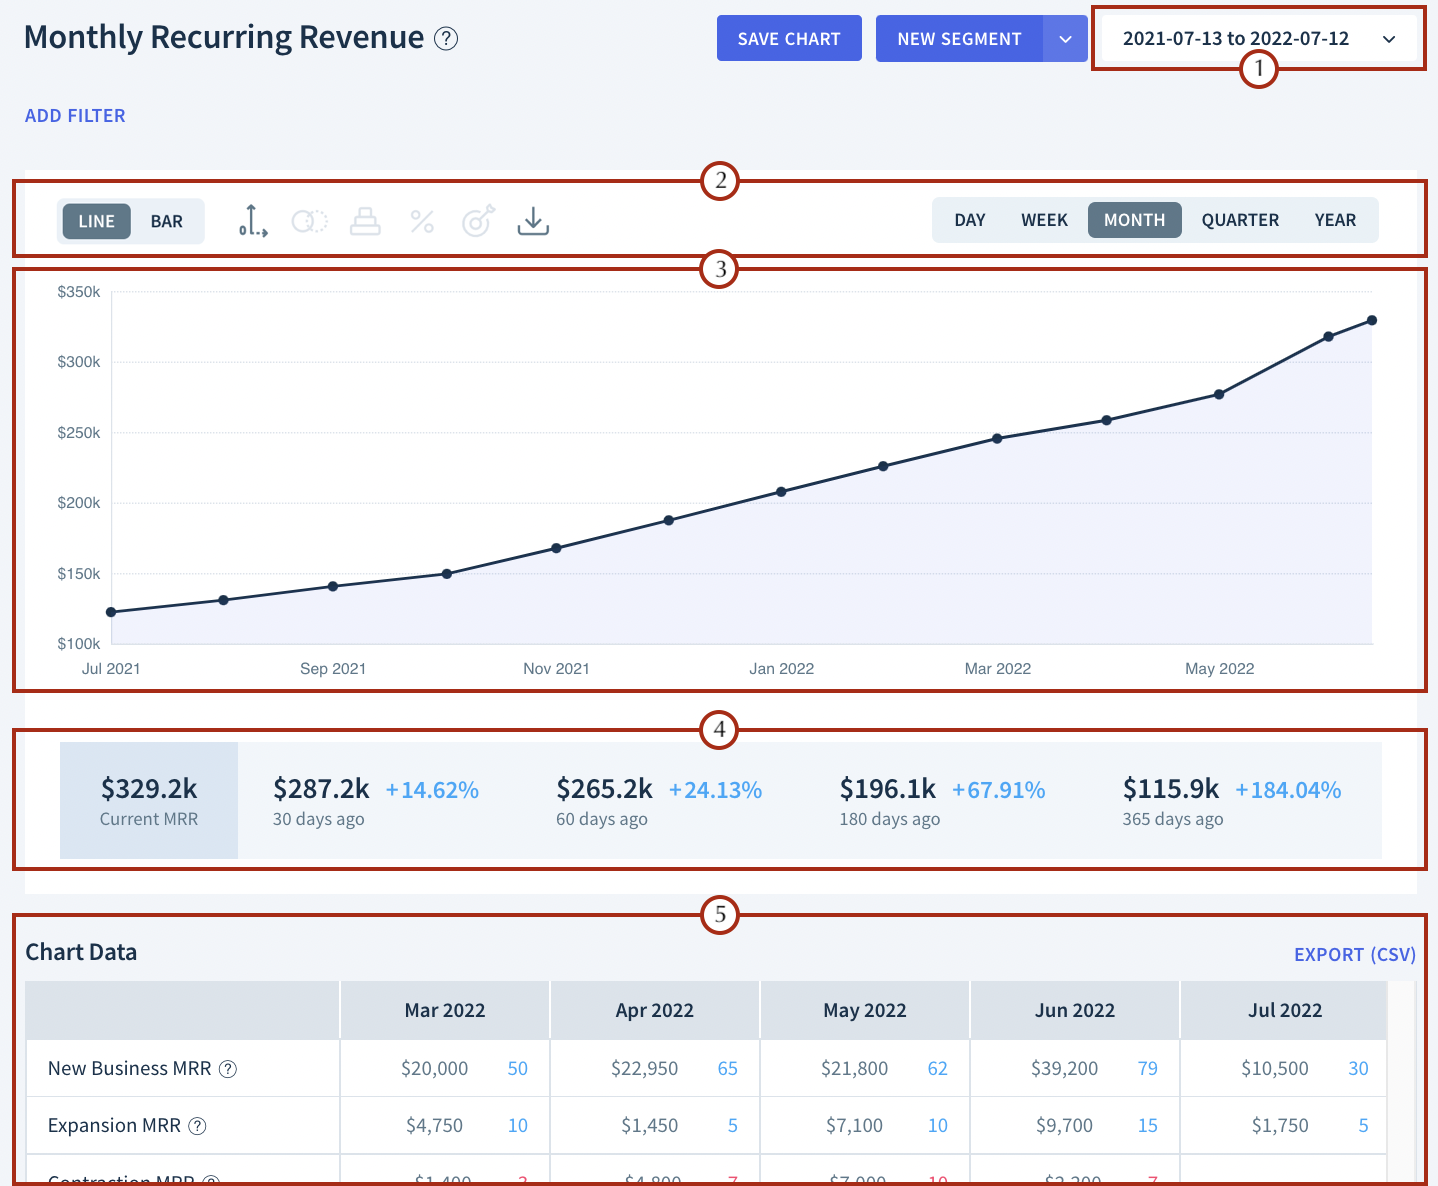 Screenshot of the Monthly Recurring Revenue chart with number labels for each of the UI element explained here